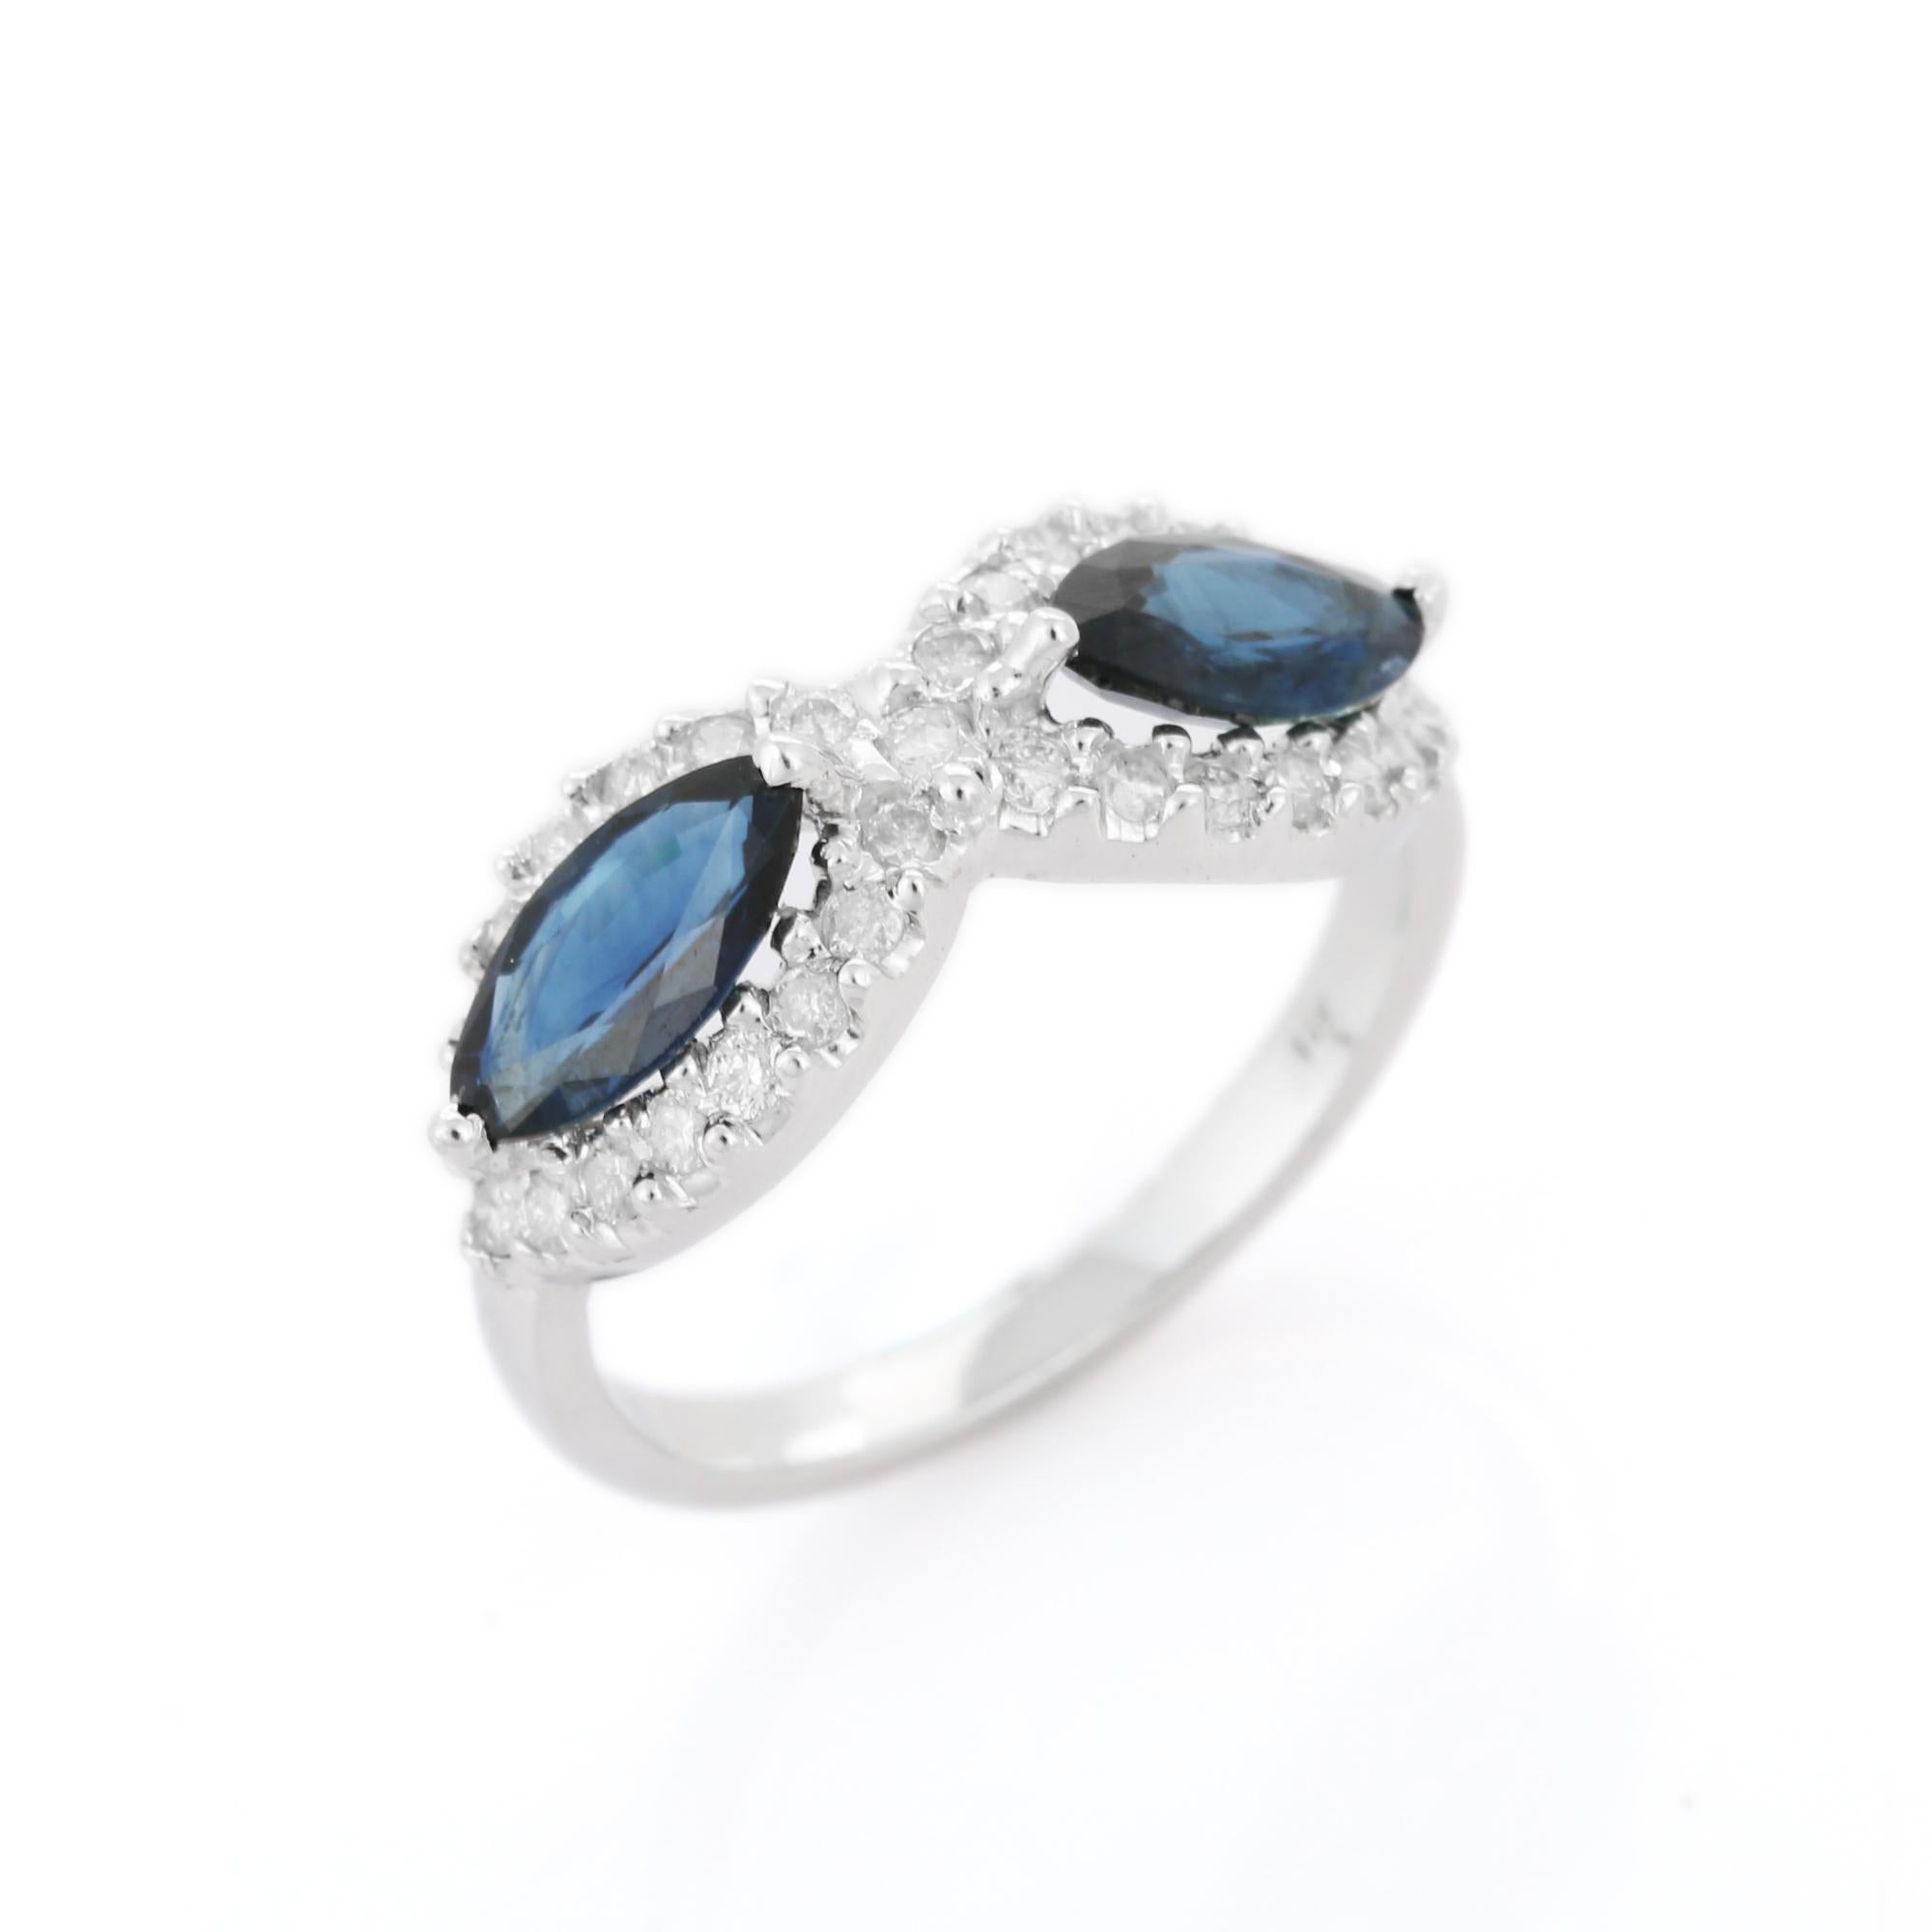 For Sale:  Women's Estate Marquise Blue Sapphire Diamond Ring in Solid 14k White Gold 5